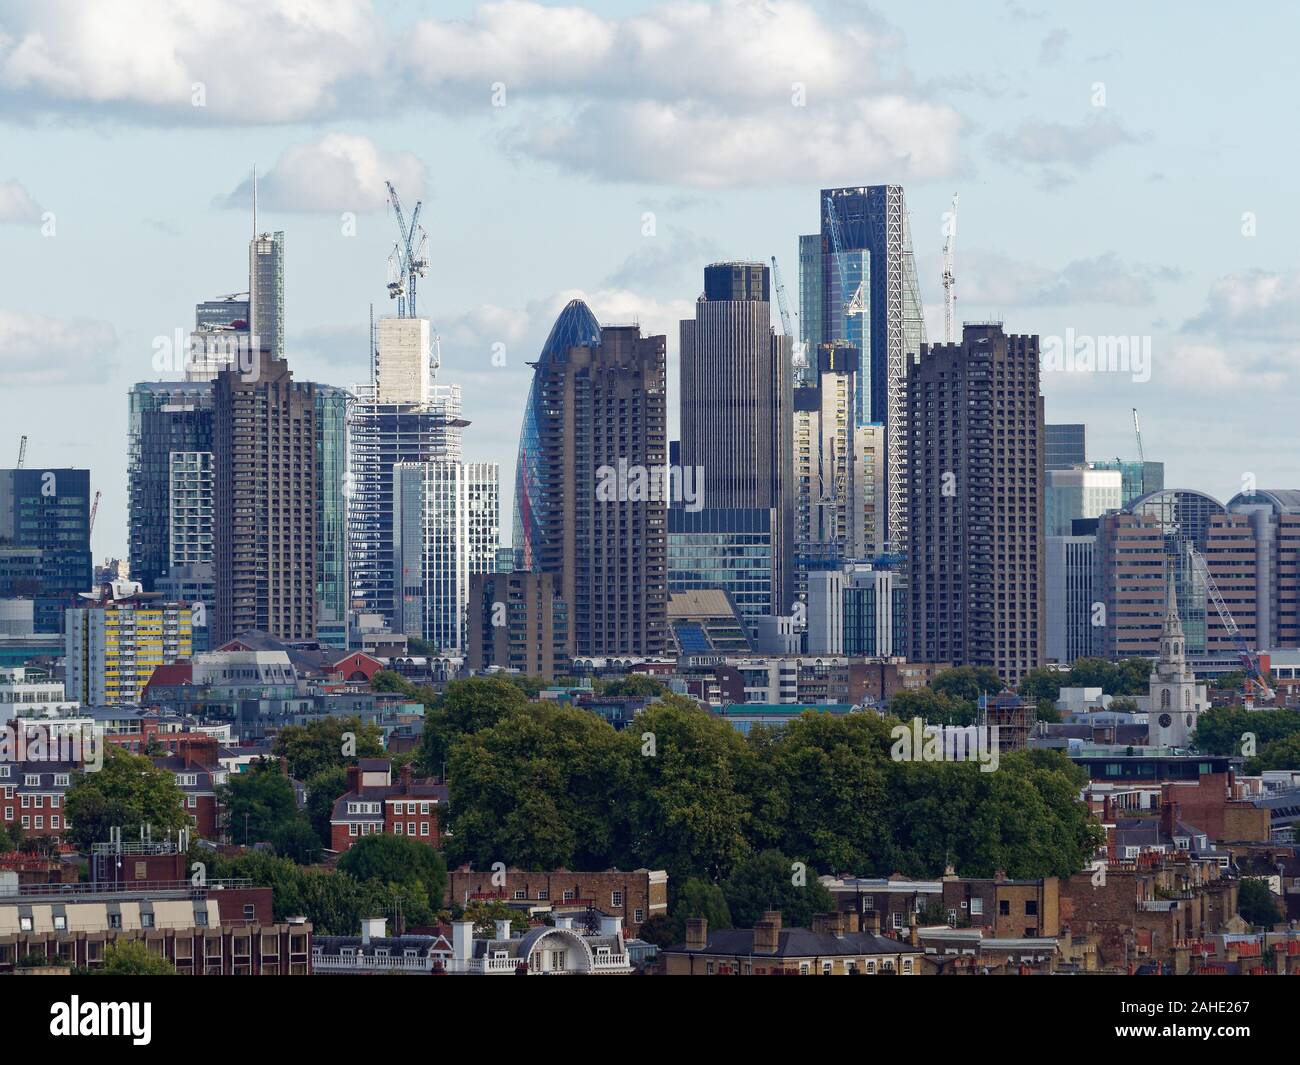 View on the City of London from Kings Cross (north), with residential low-rise buildings and the Barbican complex in front. Stock Photo